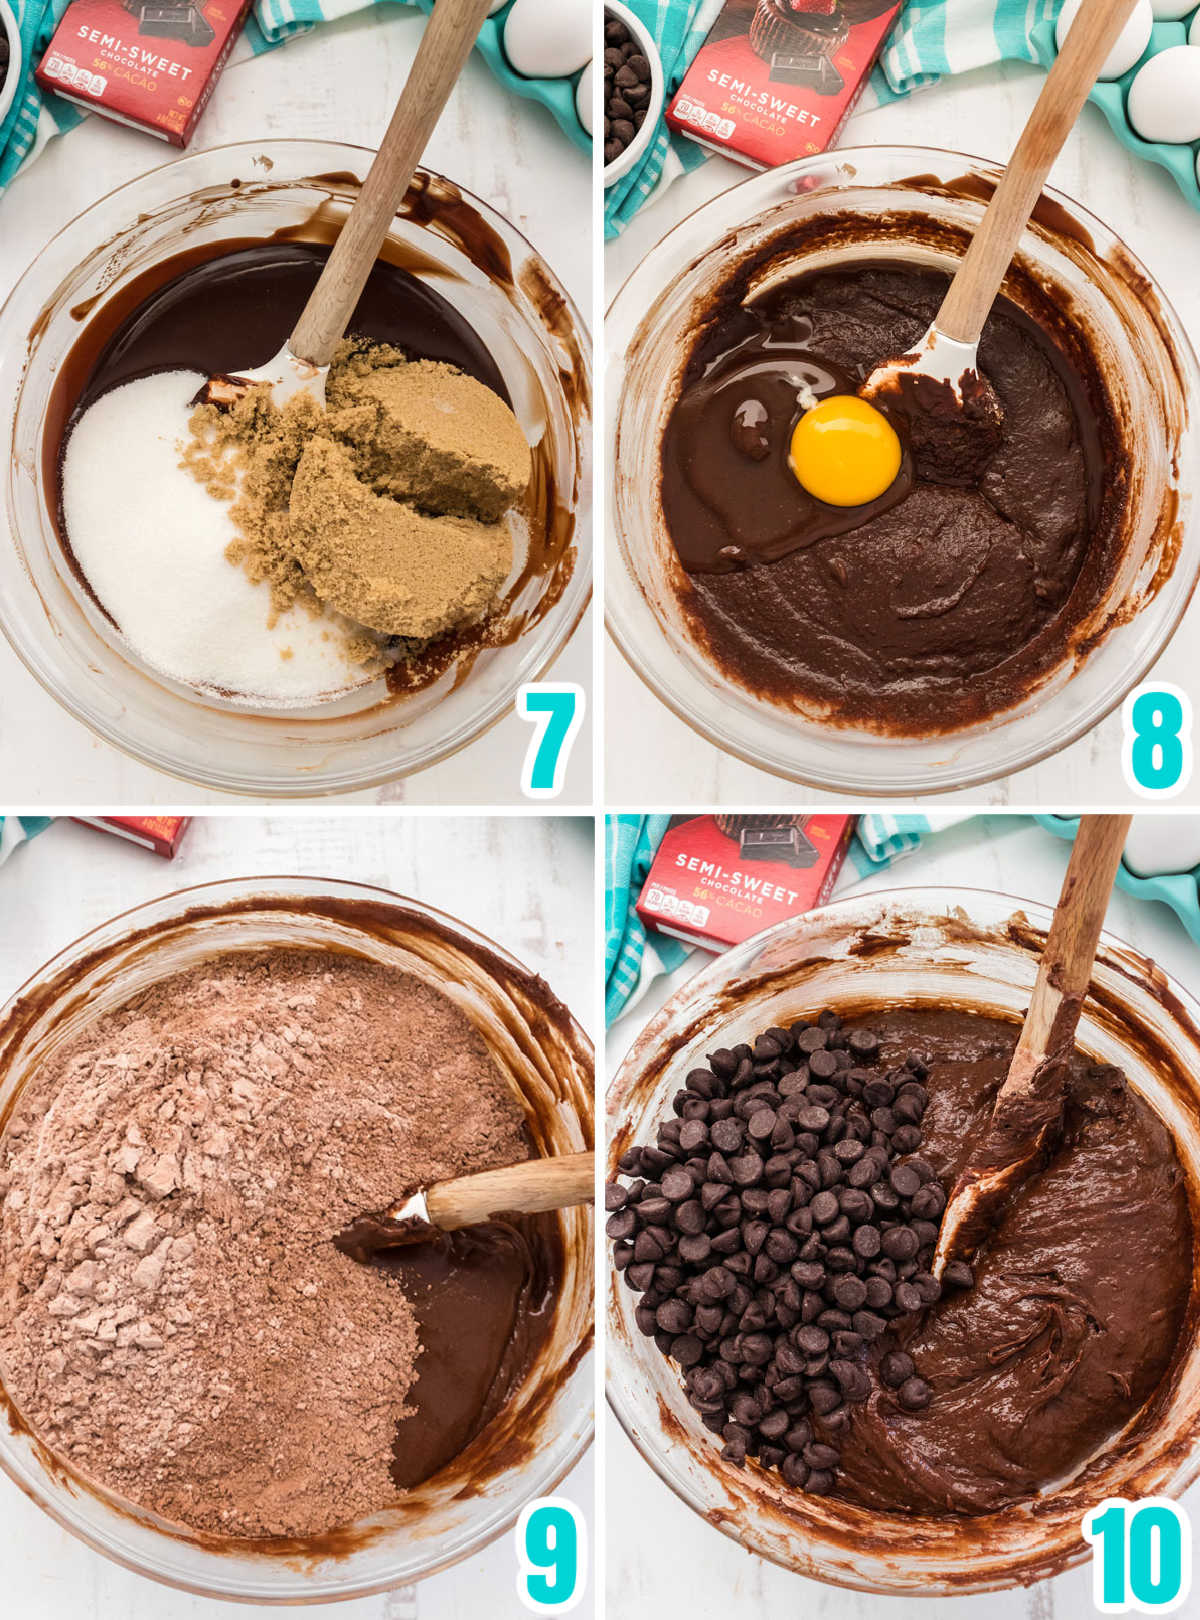 Collage image showing the steps needed to make the brownie batter.